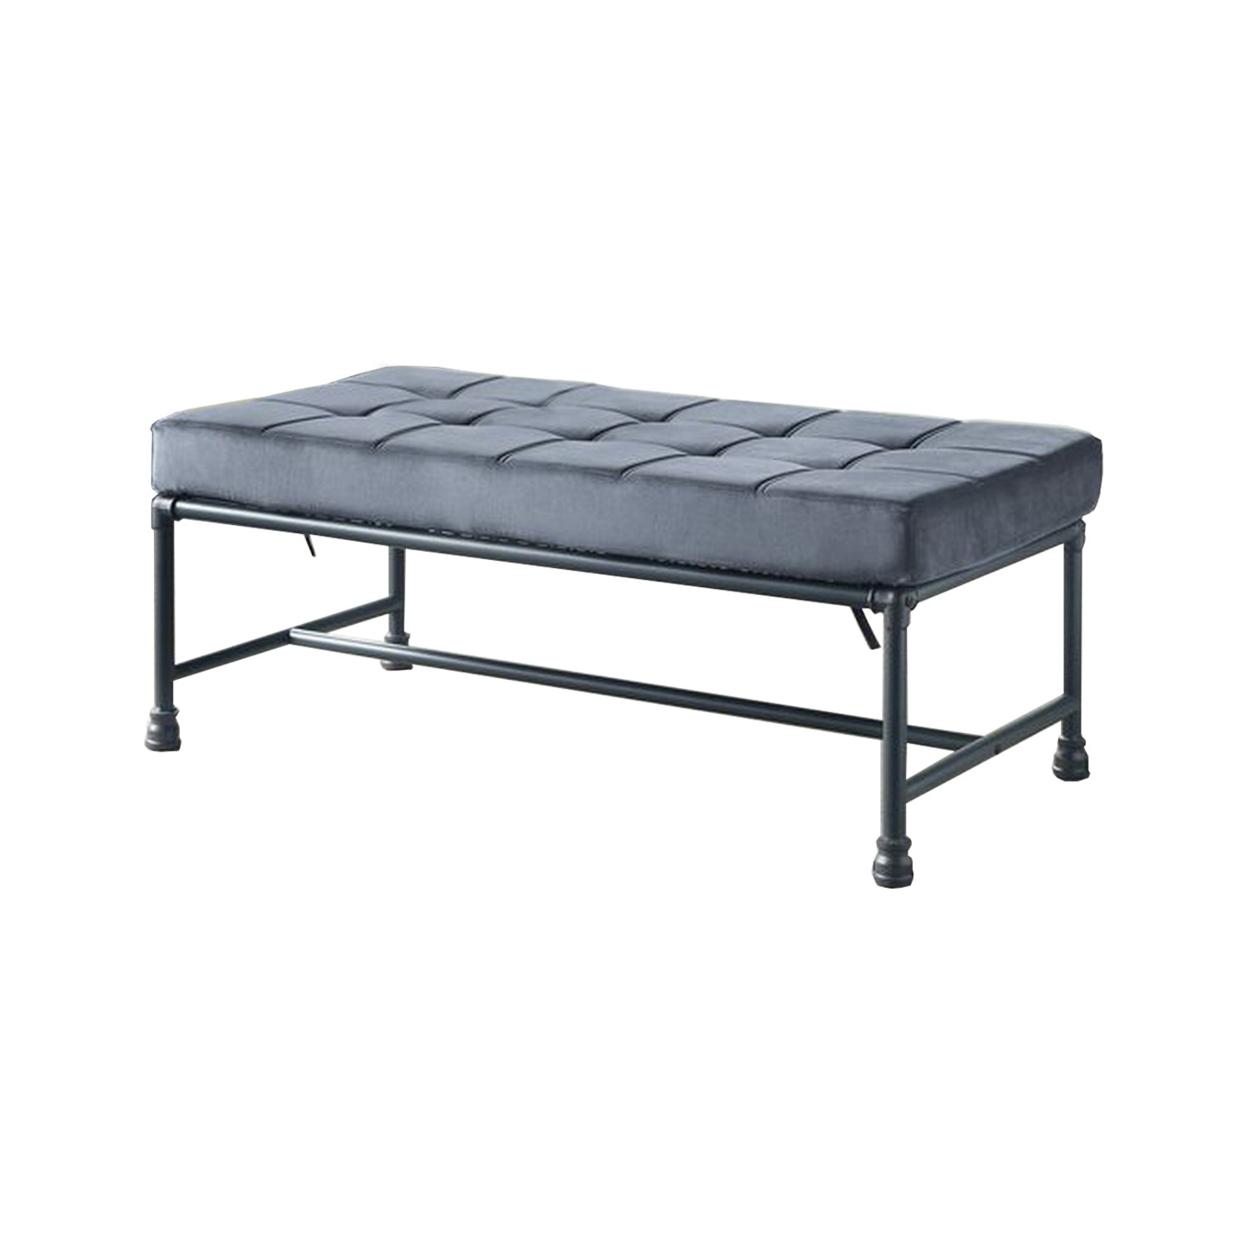 Bench With Button Tufted Seat And Pipe Style Metal Frame, Gray- Saltoro Sherpi